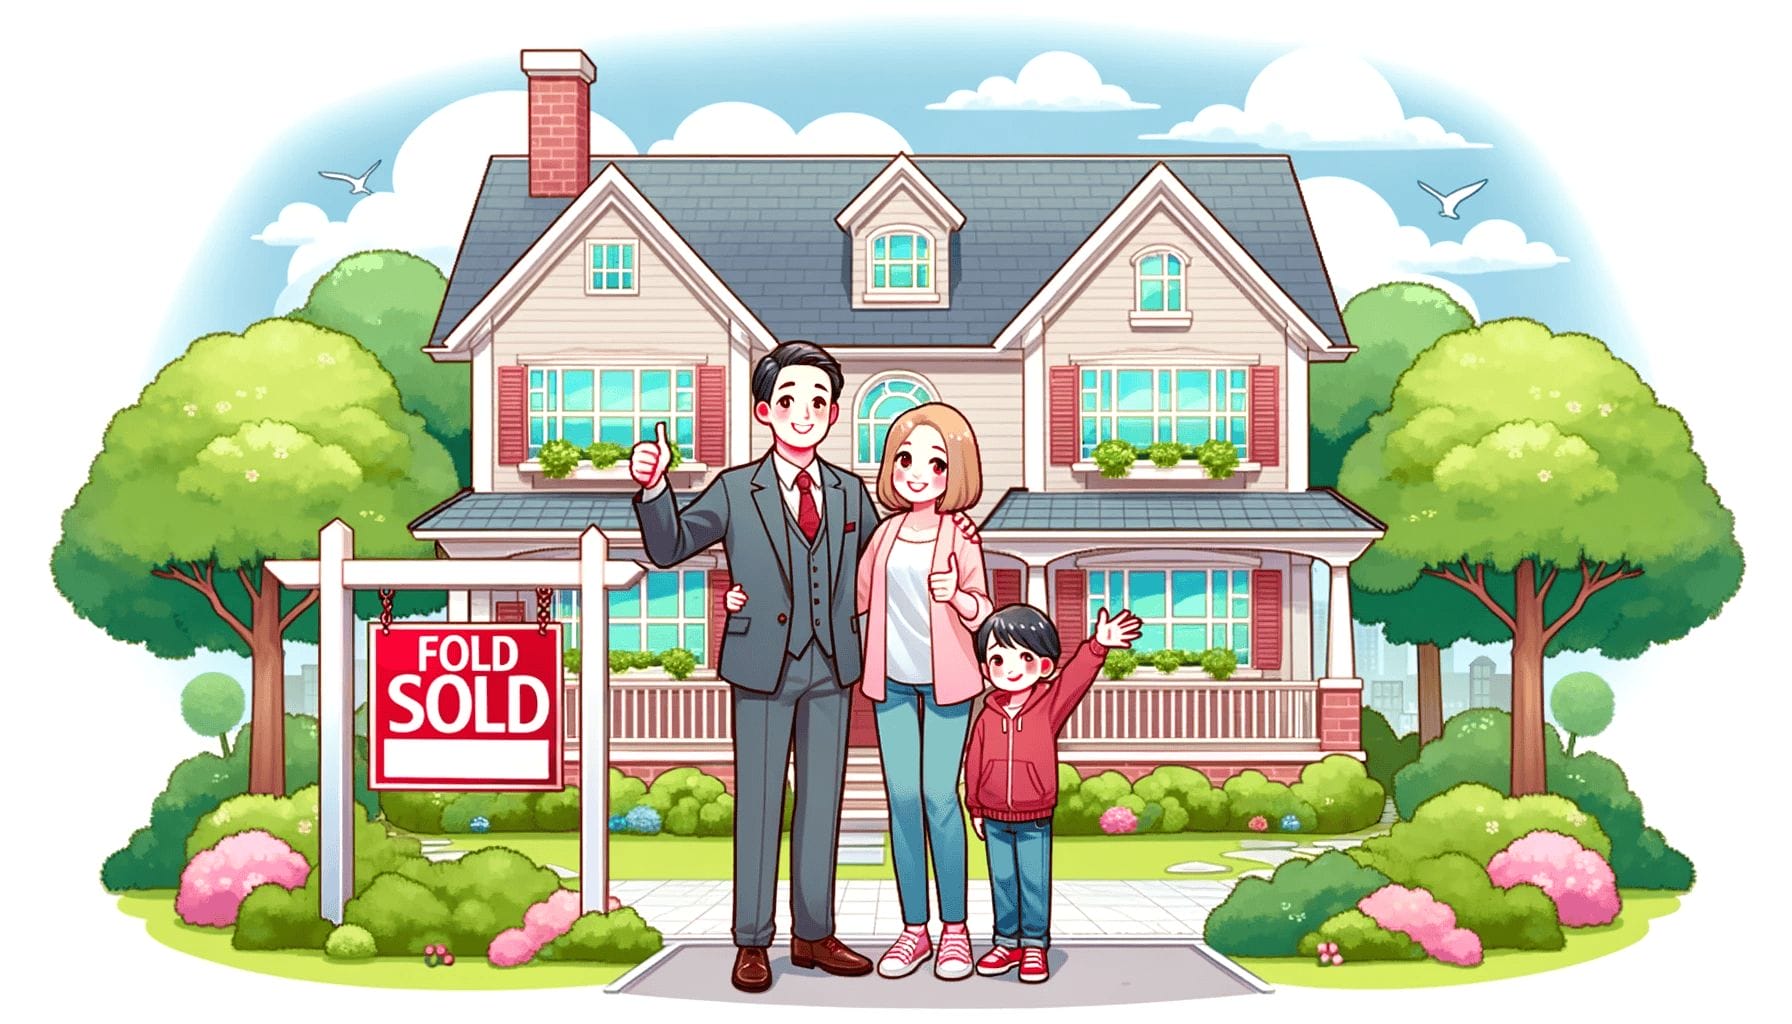 DALL·E 2023 10 16 16.54.22 Illustration of a family standing in front of their new dream house with a sold sign